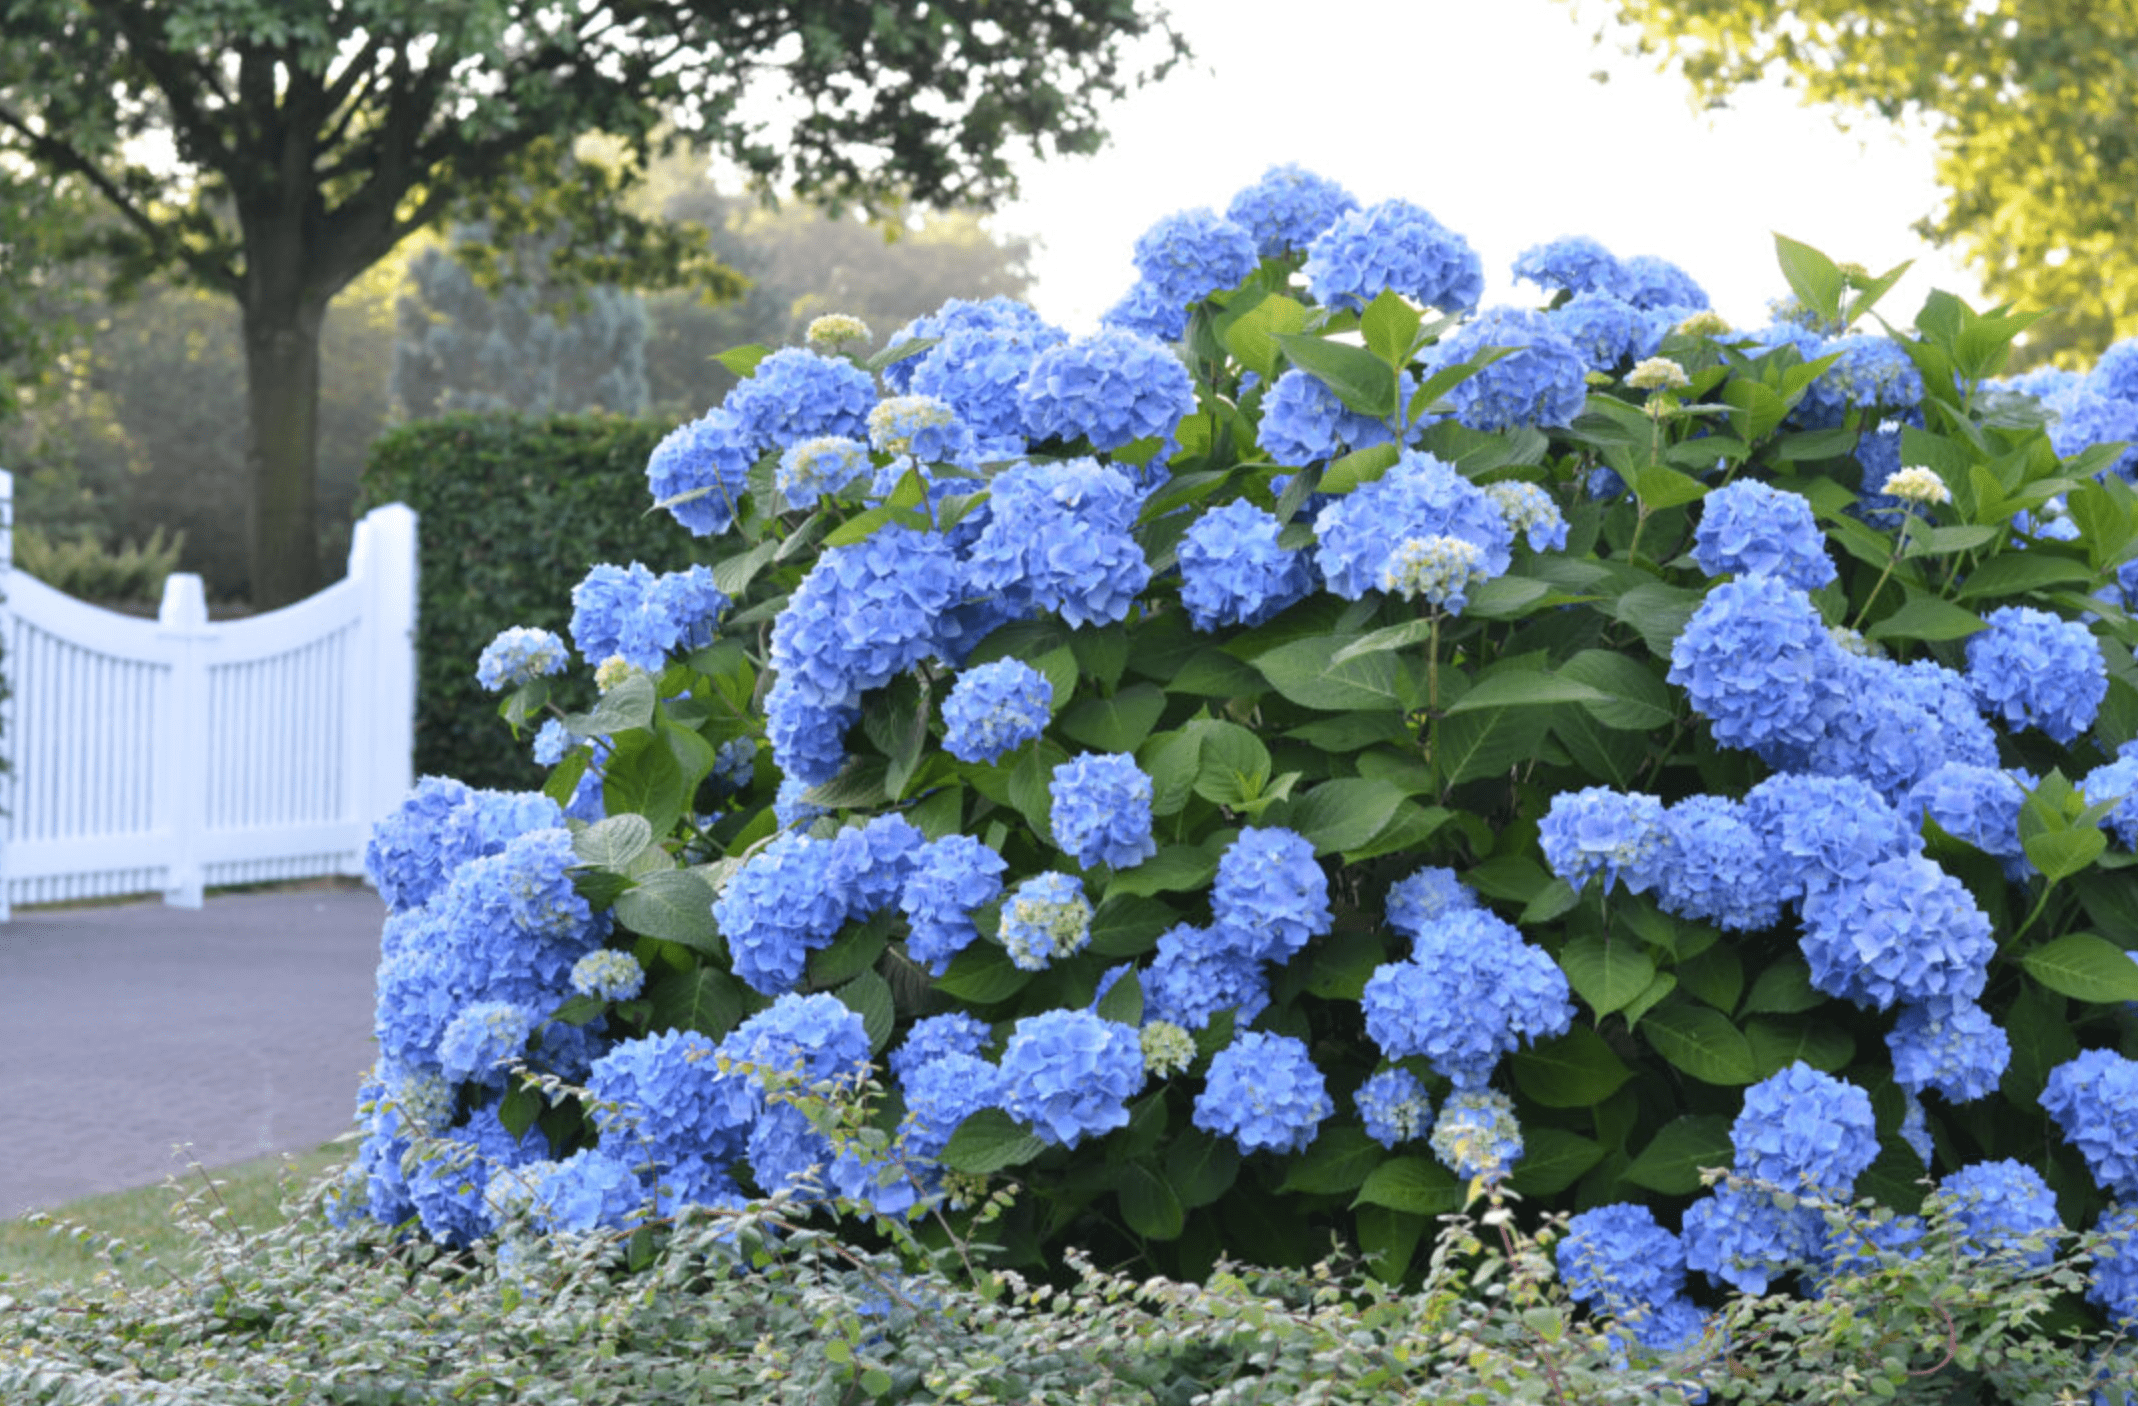 Image of Endless Summer Hydrangea in Full Bloom